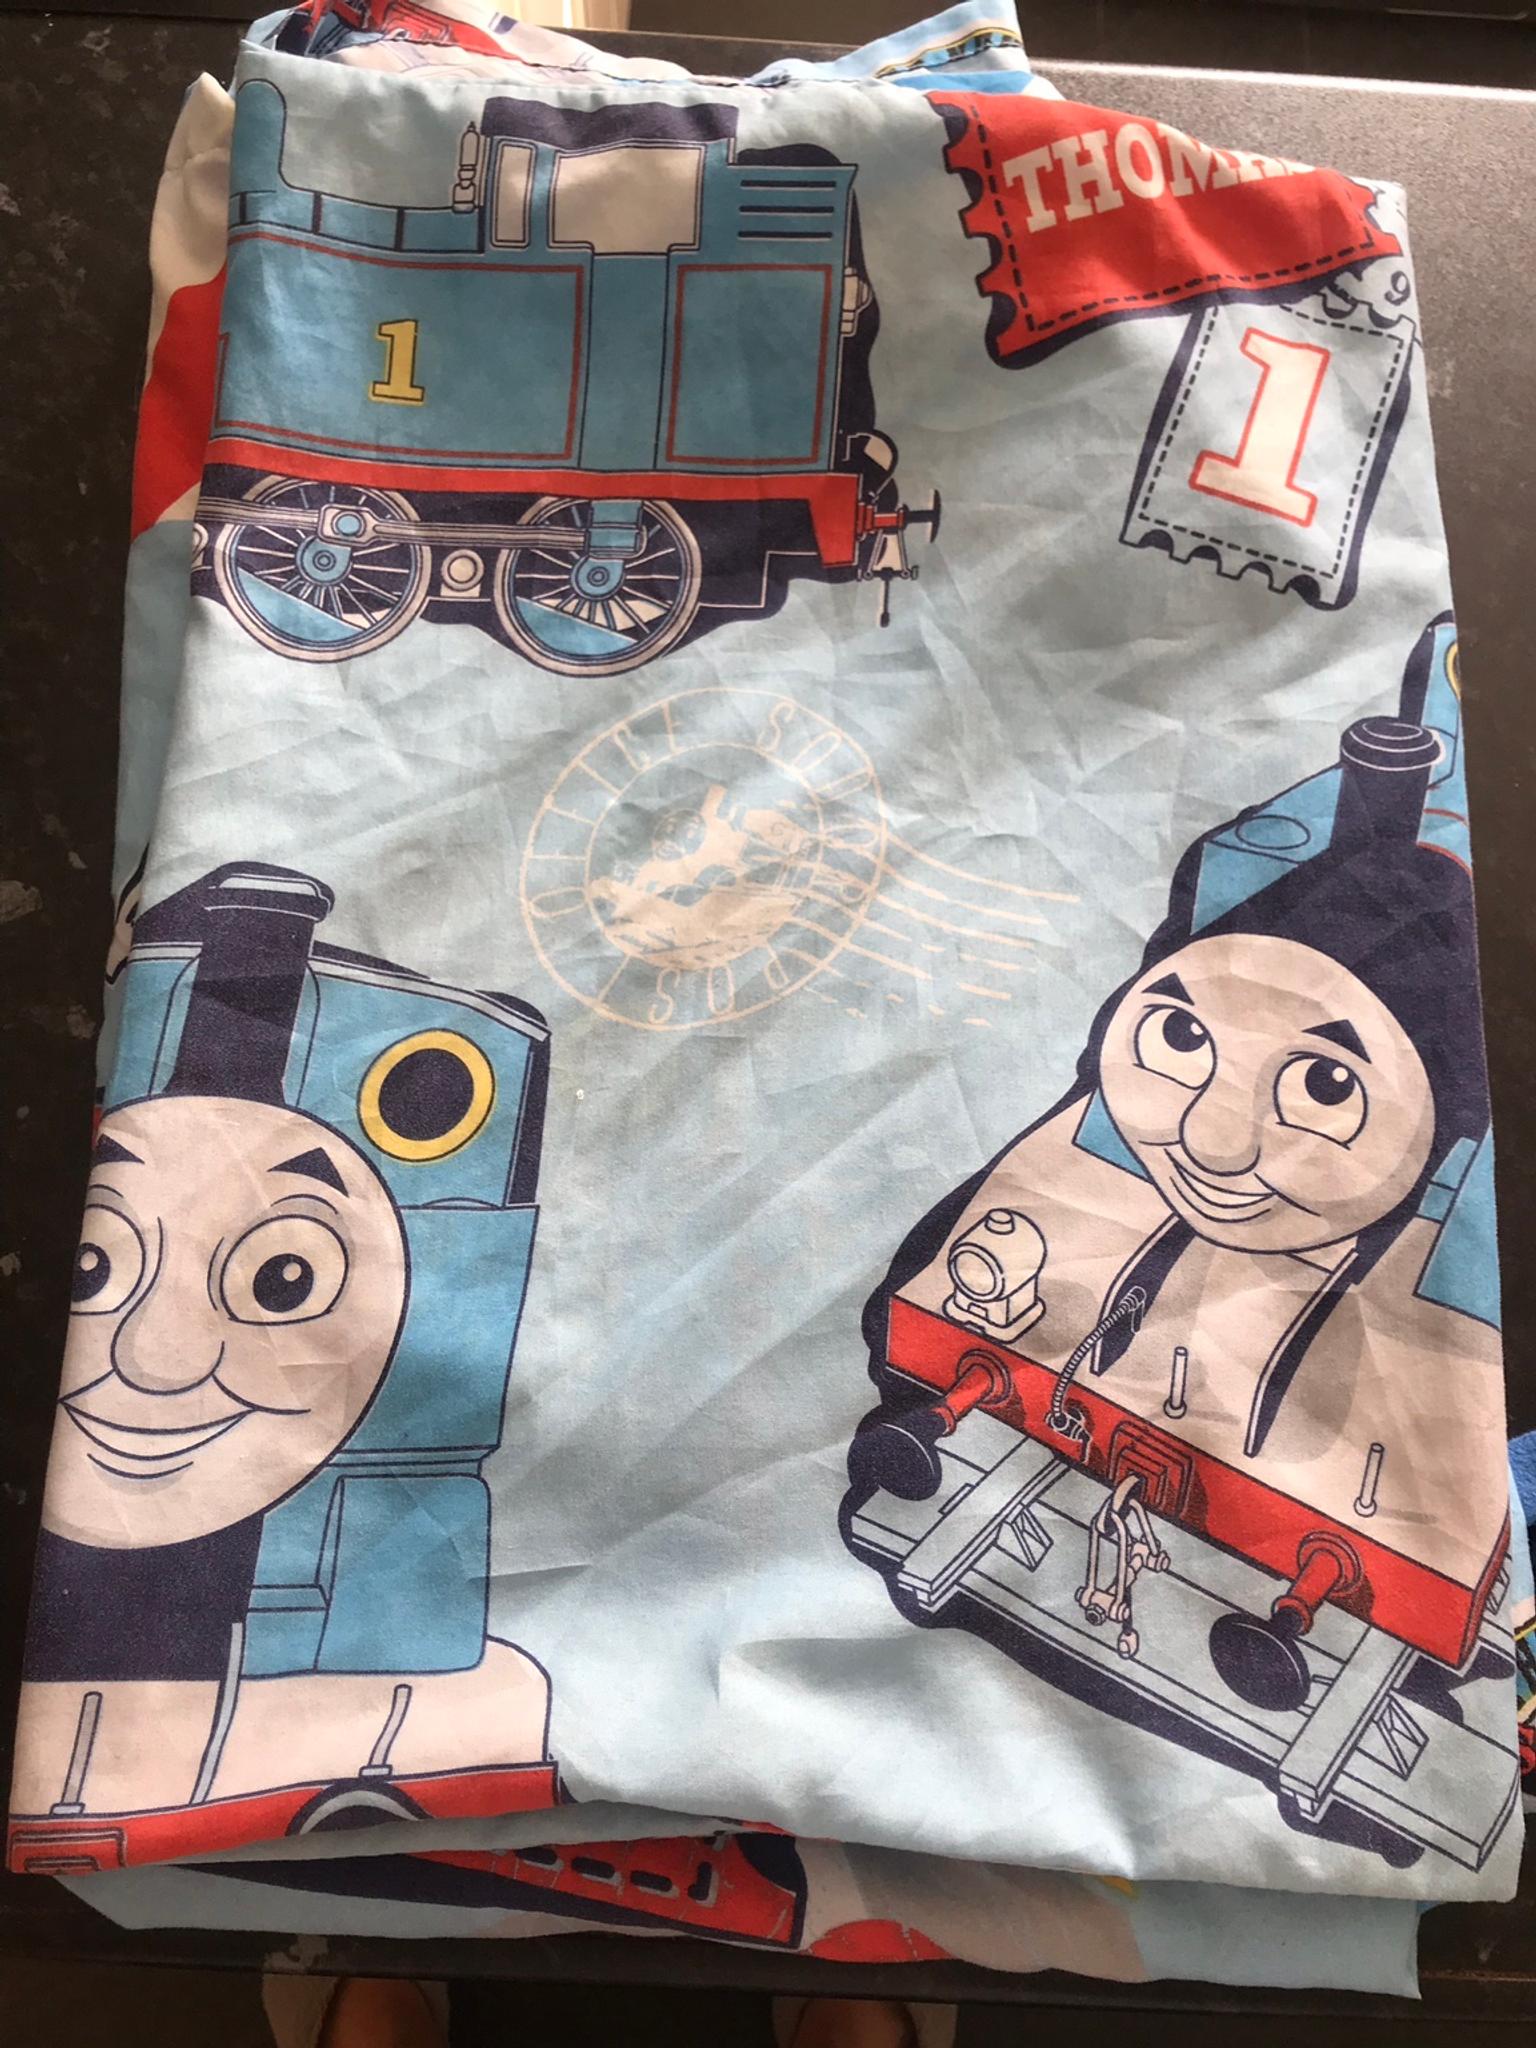 Thomas The Tank Engine Duvet Set In Cv11 Nuneaton And Bedworth For